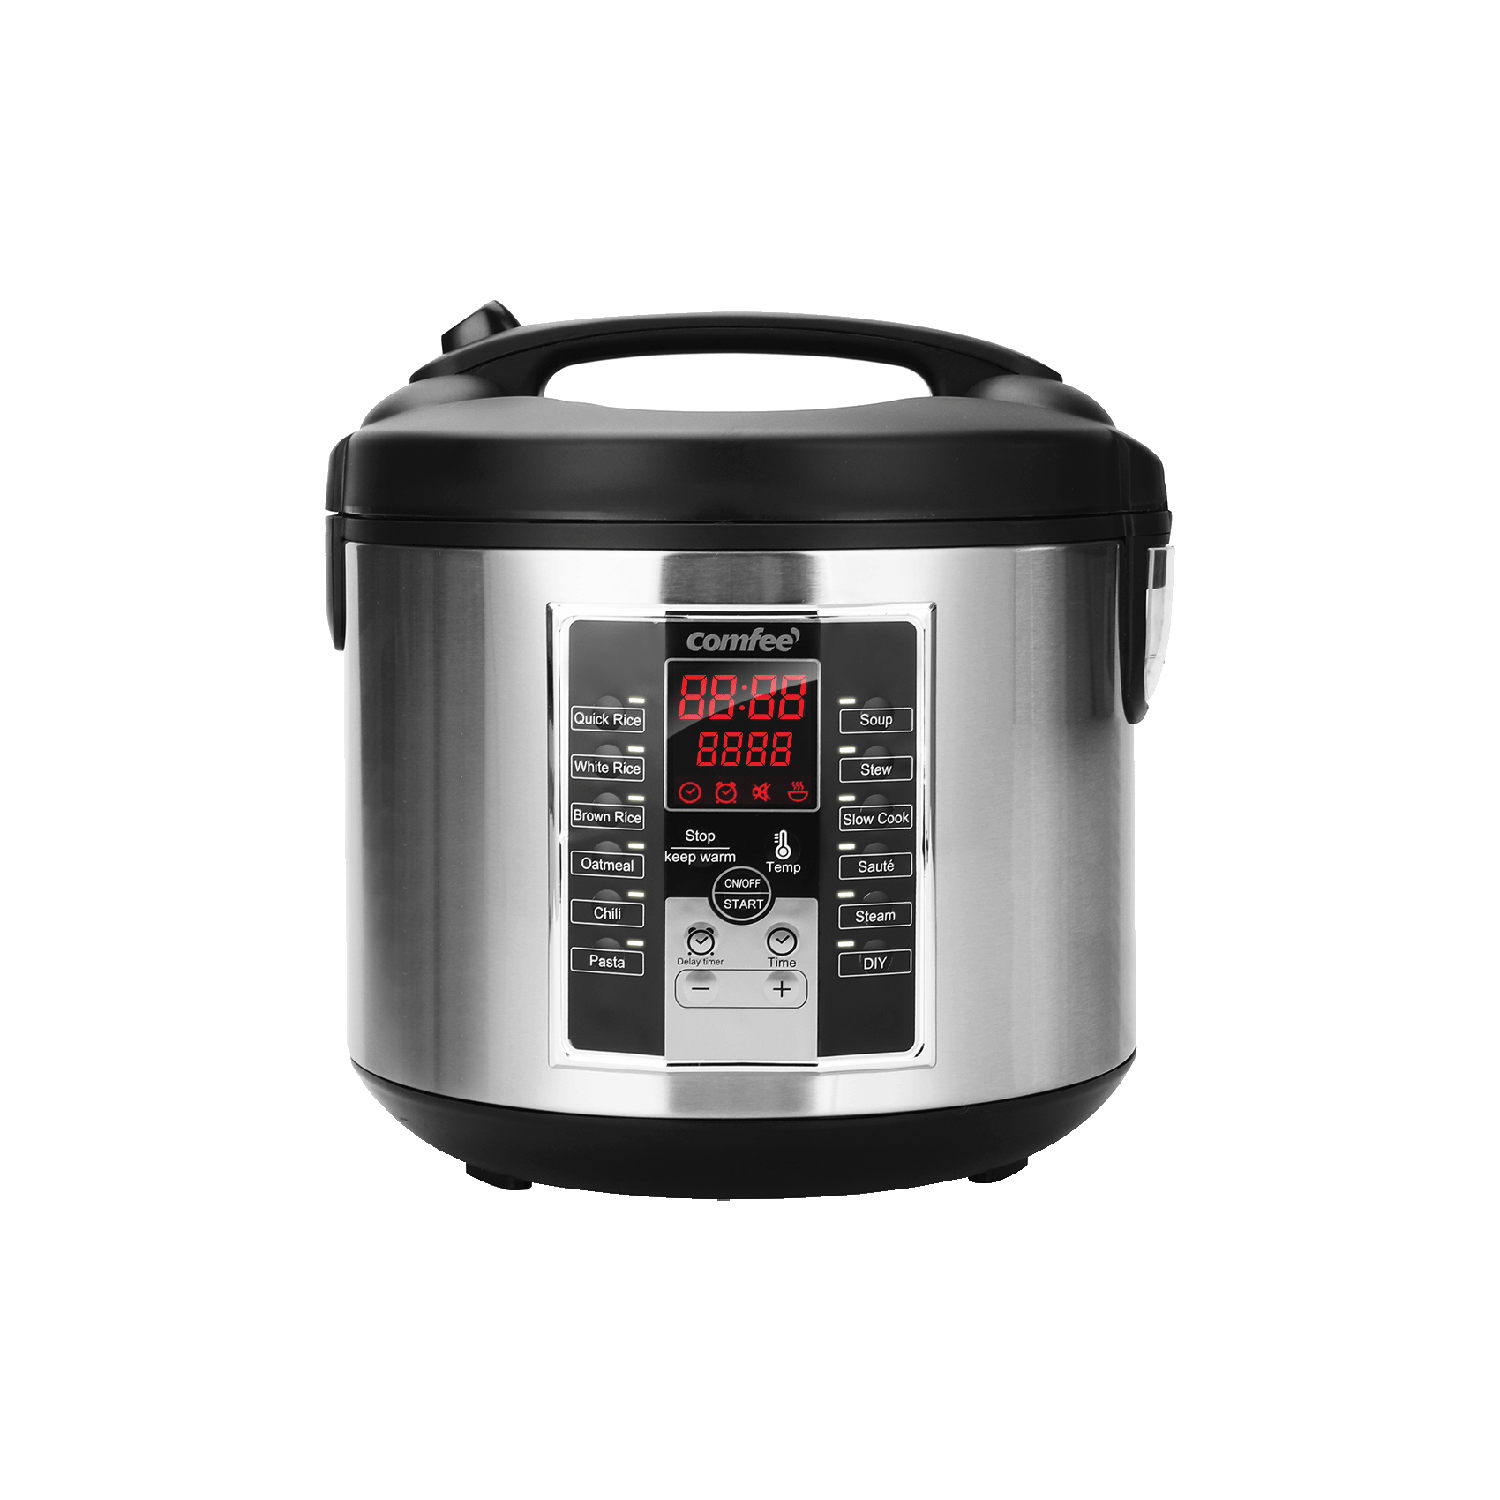 https://d1pjg4o0tbonat.cloudfront.net/content/dam/comfee-aem/global/products/small-appliances/all-in-1-multi-cooker-rice-cooker-mb-m25/kv1.png/jcr:content/renditions/cq5dam.compression.png